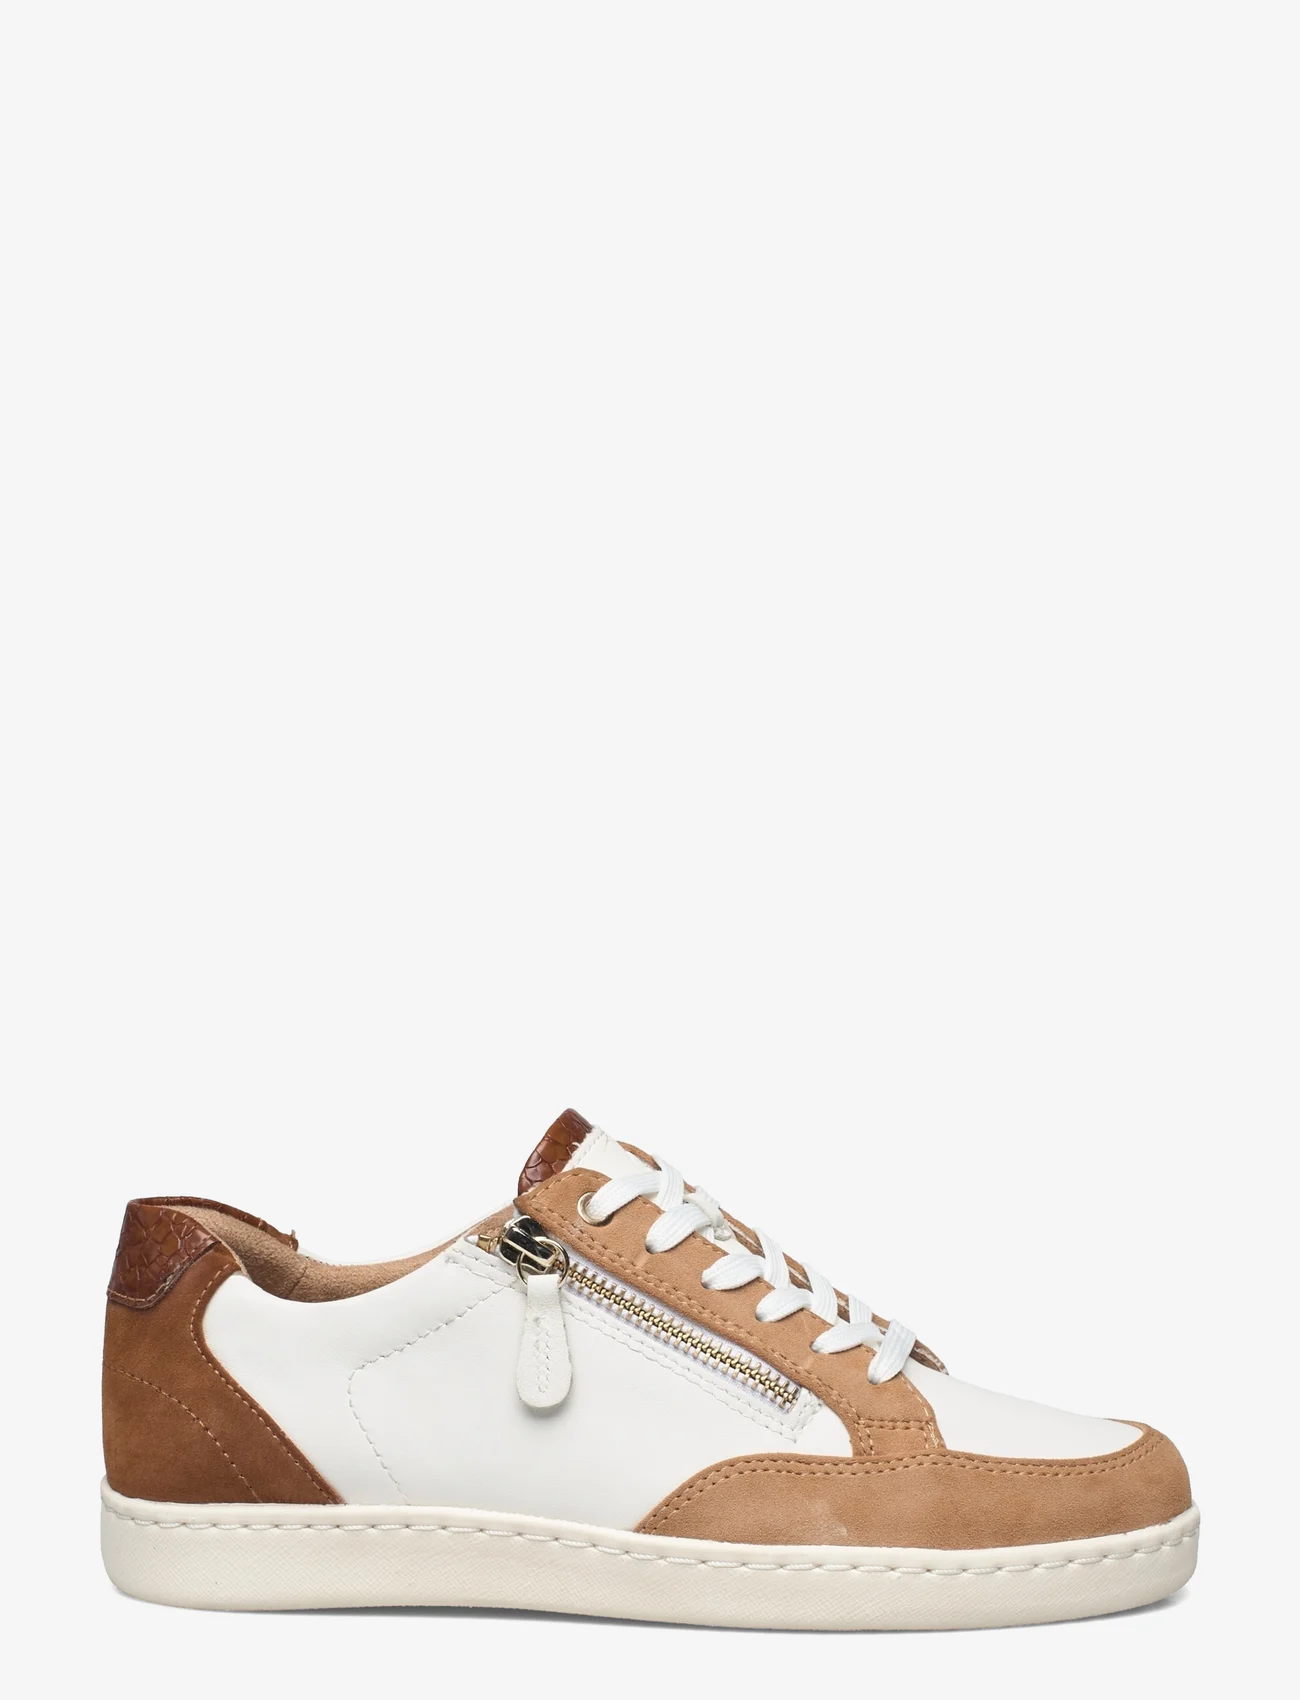 Tamaris - Woms Lace-up - low top sneakers - wht/almond com - 1